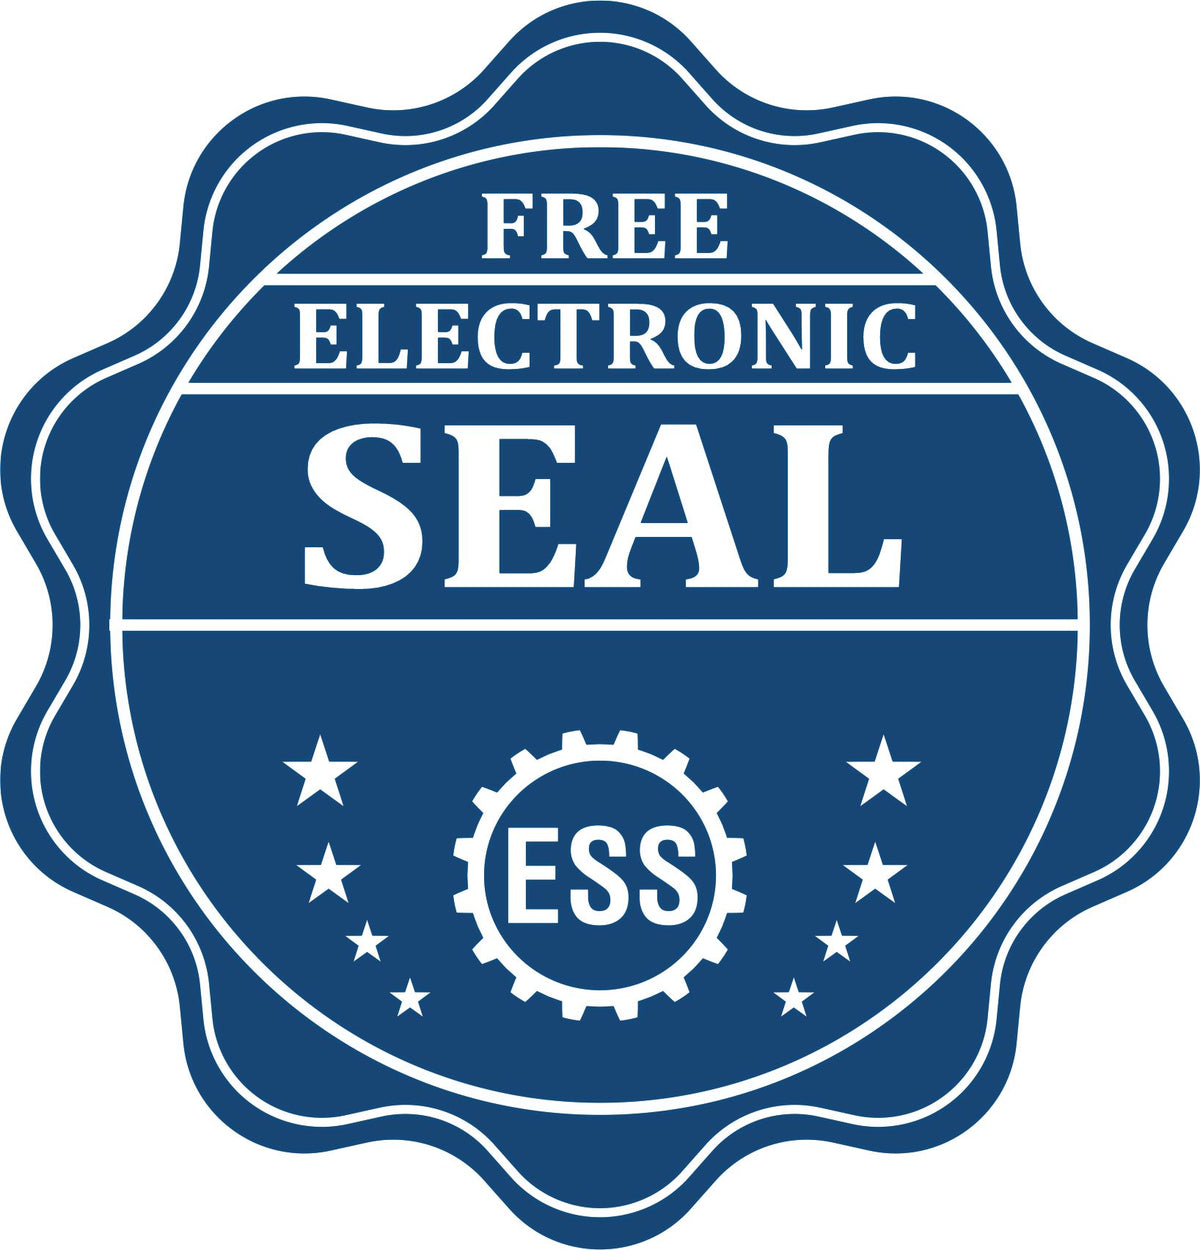 A badge showing a free electronic seal for the Hybrid Ohio Geologist Seal with stars and the ESS gear on the emblem.